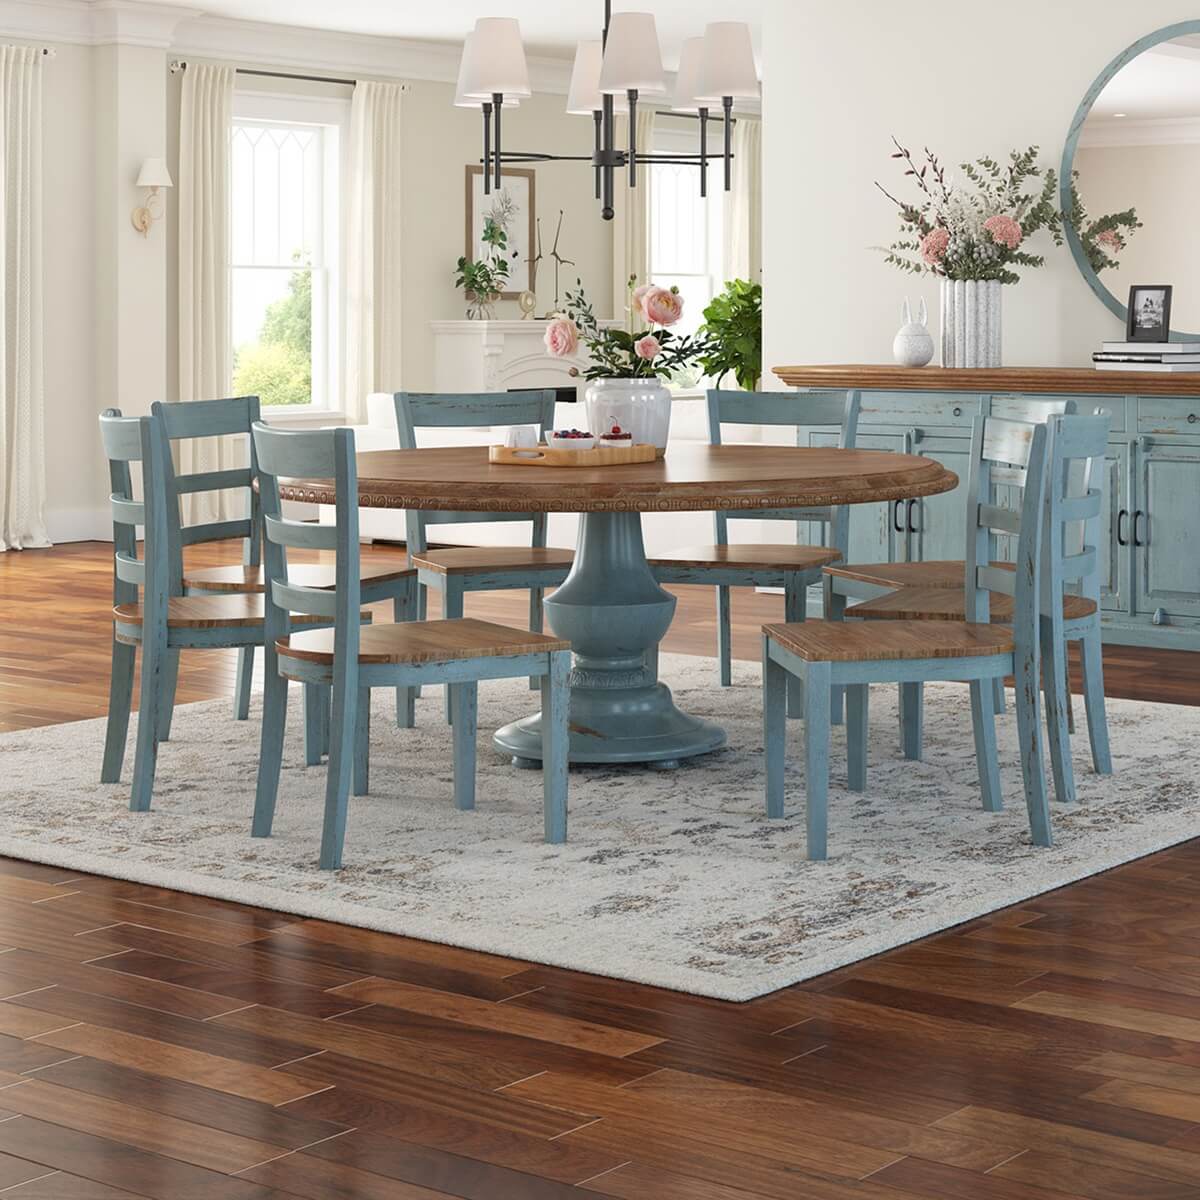 https://www.sierralivingconcepts.com/images/thumbs/0413308_conway-farmhouse-two-tone-solid-wood-round-dining-table-chair-set.jpeg